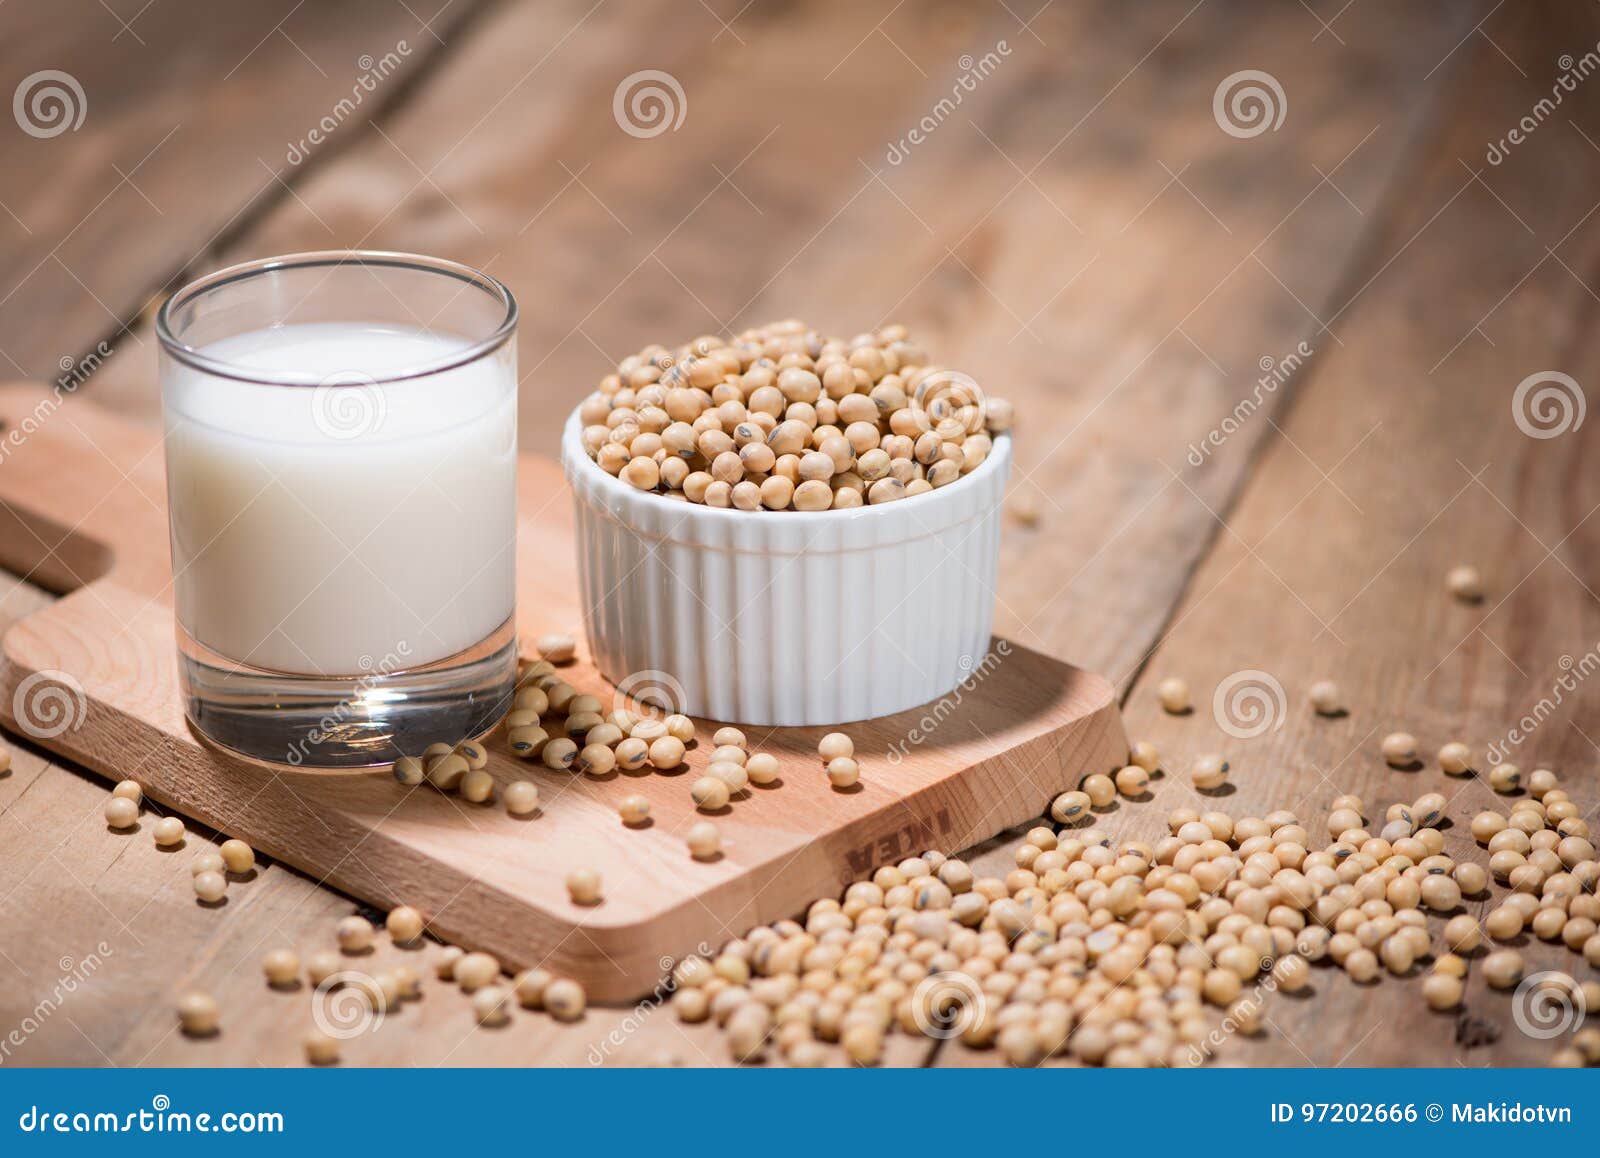 soy milk or soya milk and soy beans in spoon on wooden table.